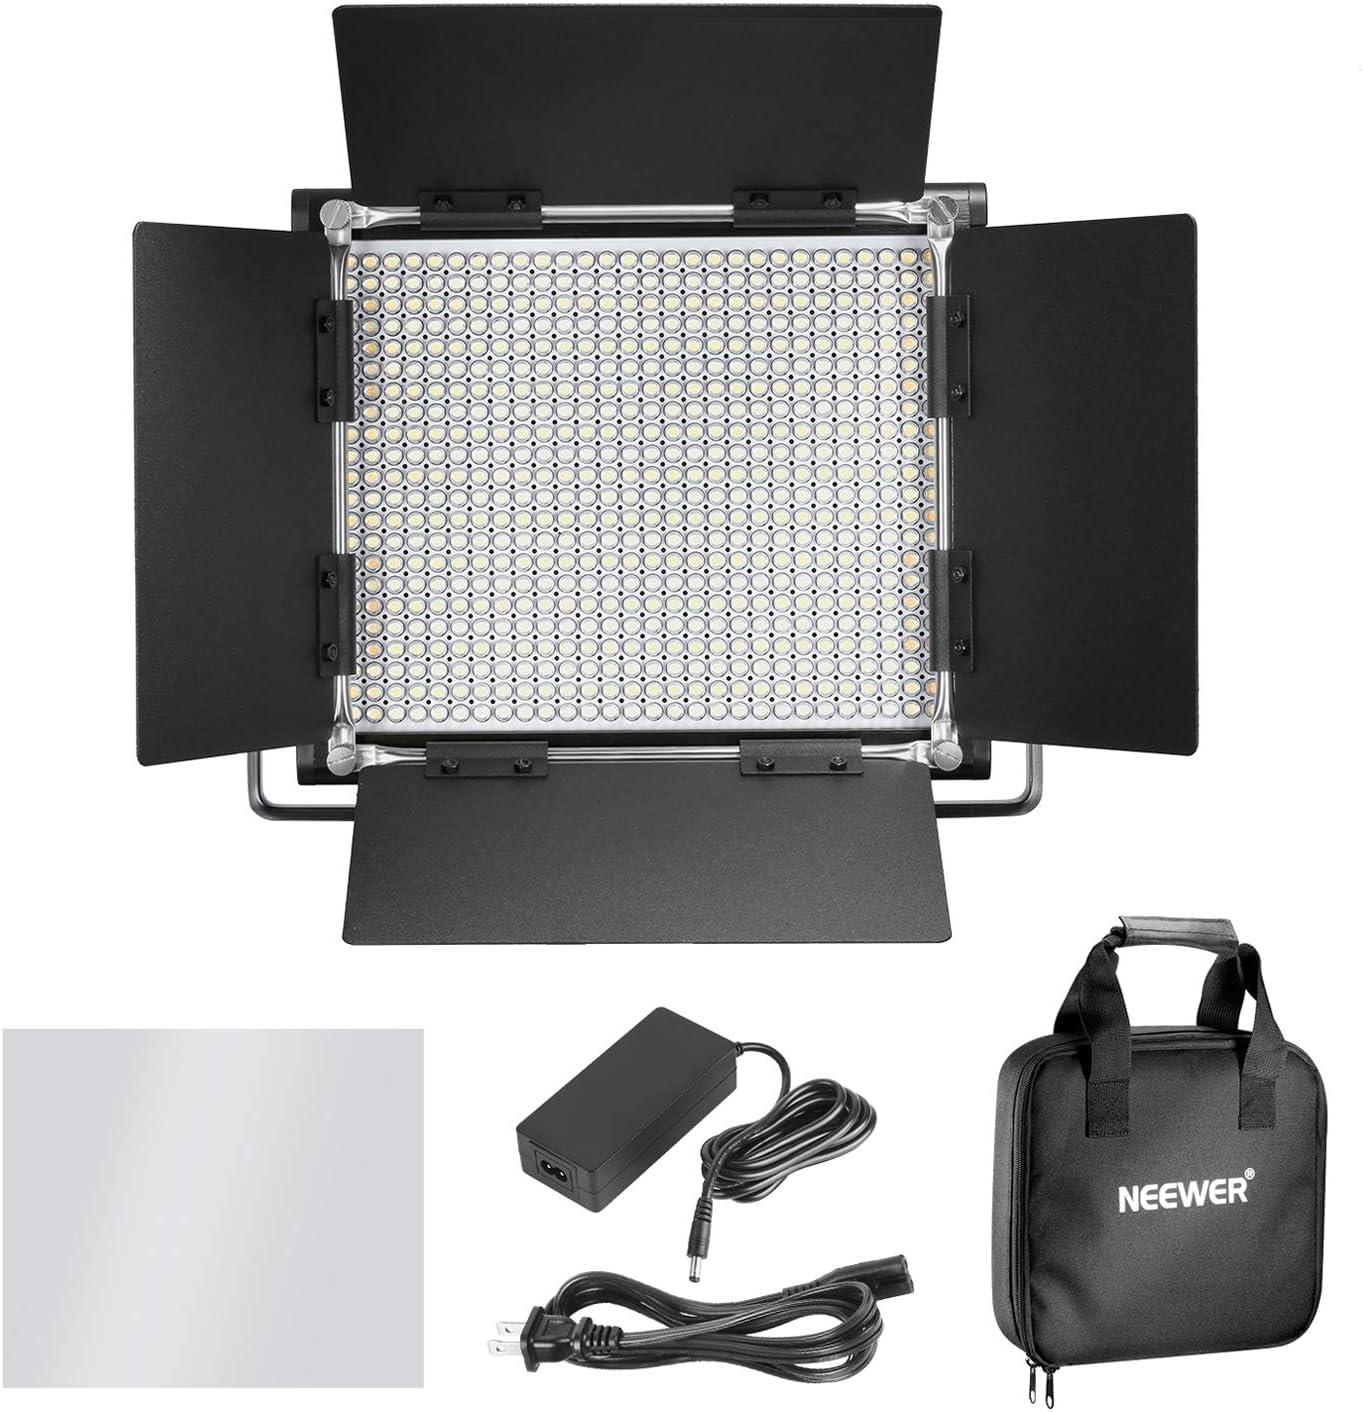 Neewer 660 Beads LED Video Light Dimmable Bi-Color LED Panel with LCD  Screen